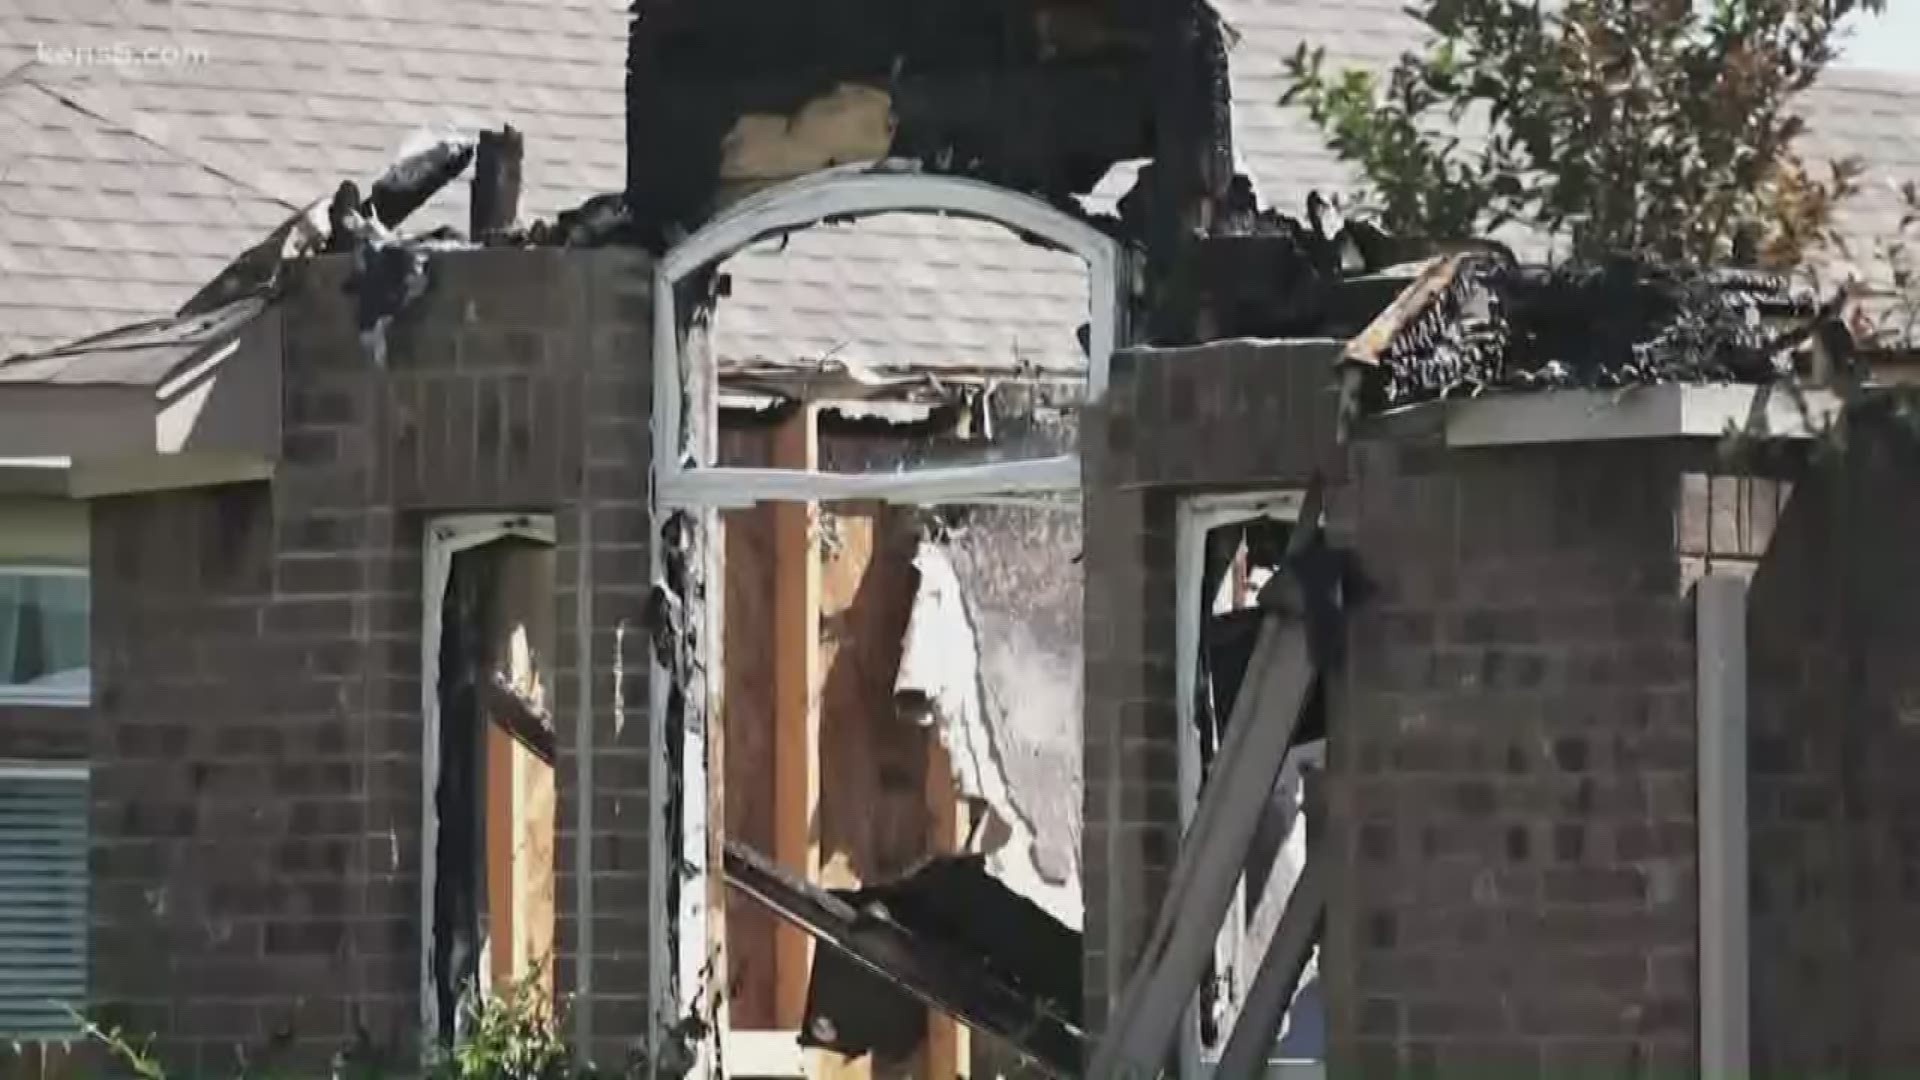 When storms came through South Texas on Monday, a bolt of lightning burned this family's home to ashes. The family lost almost everything, save for a few heirlooms and the family Bible.